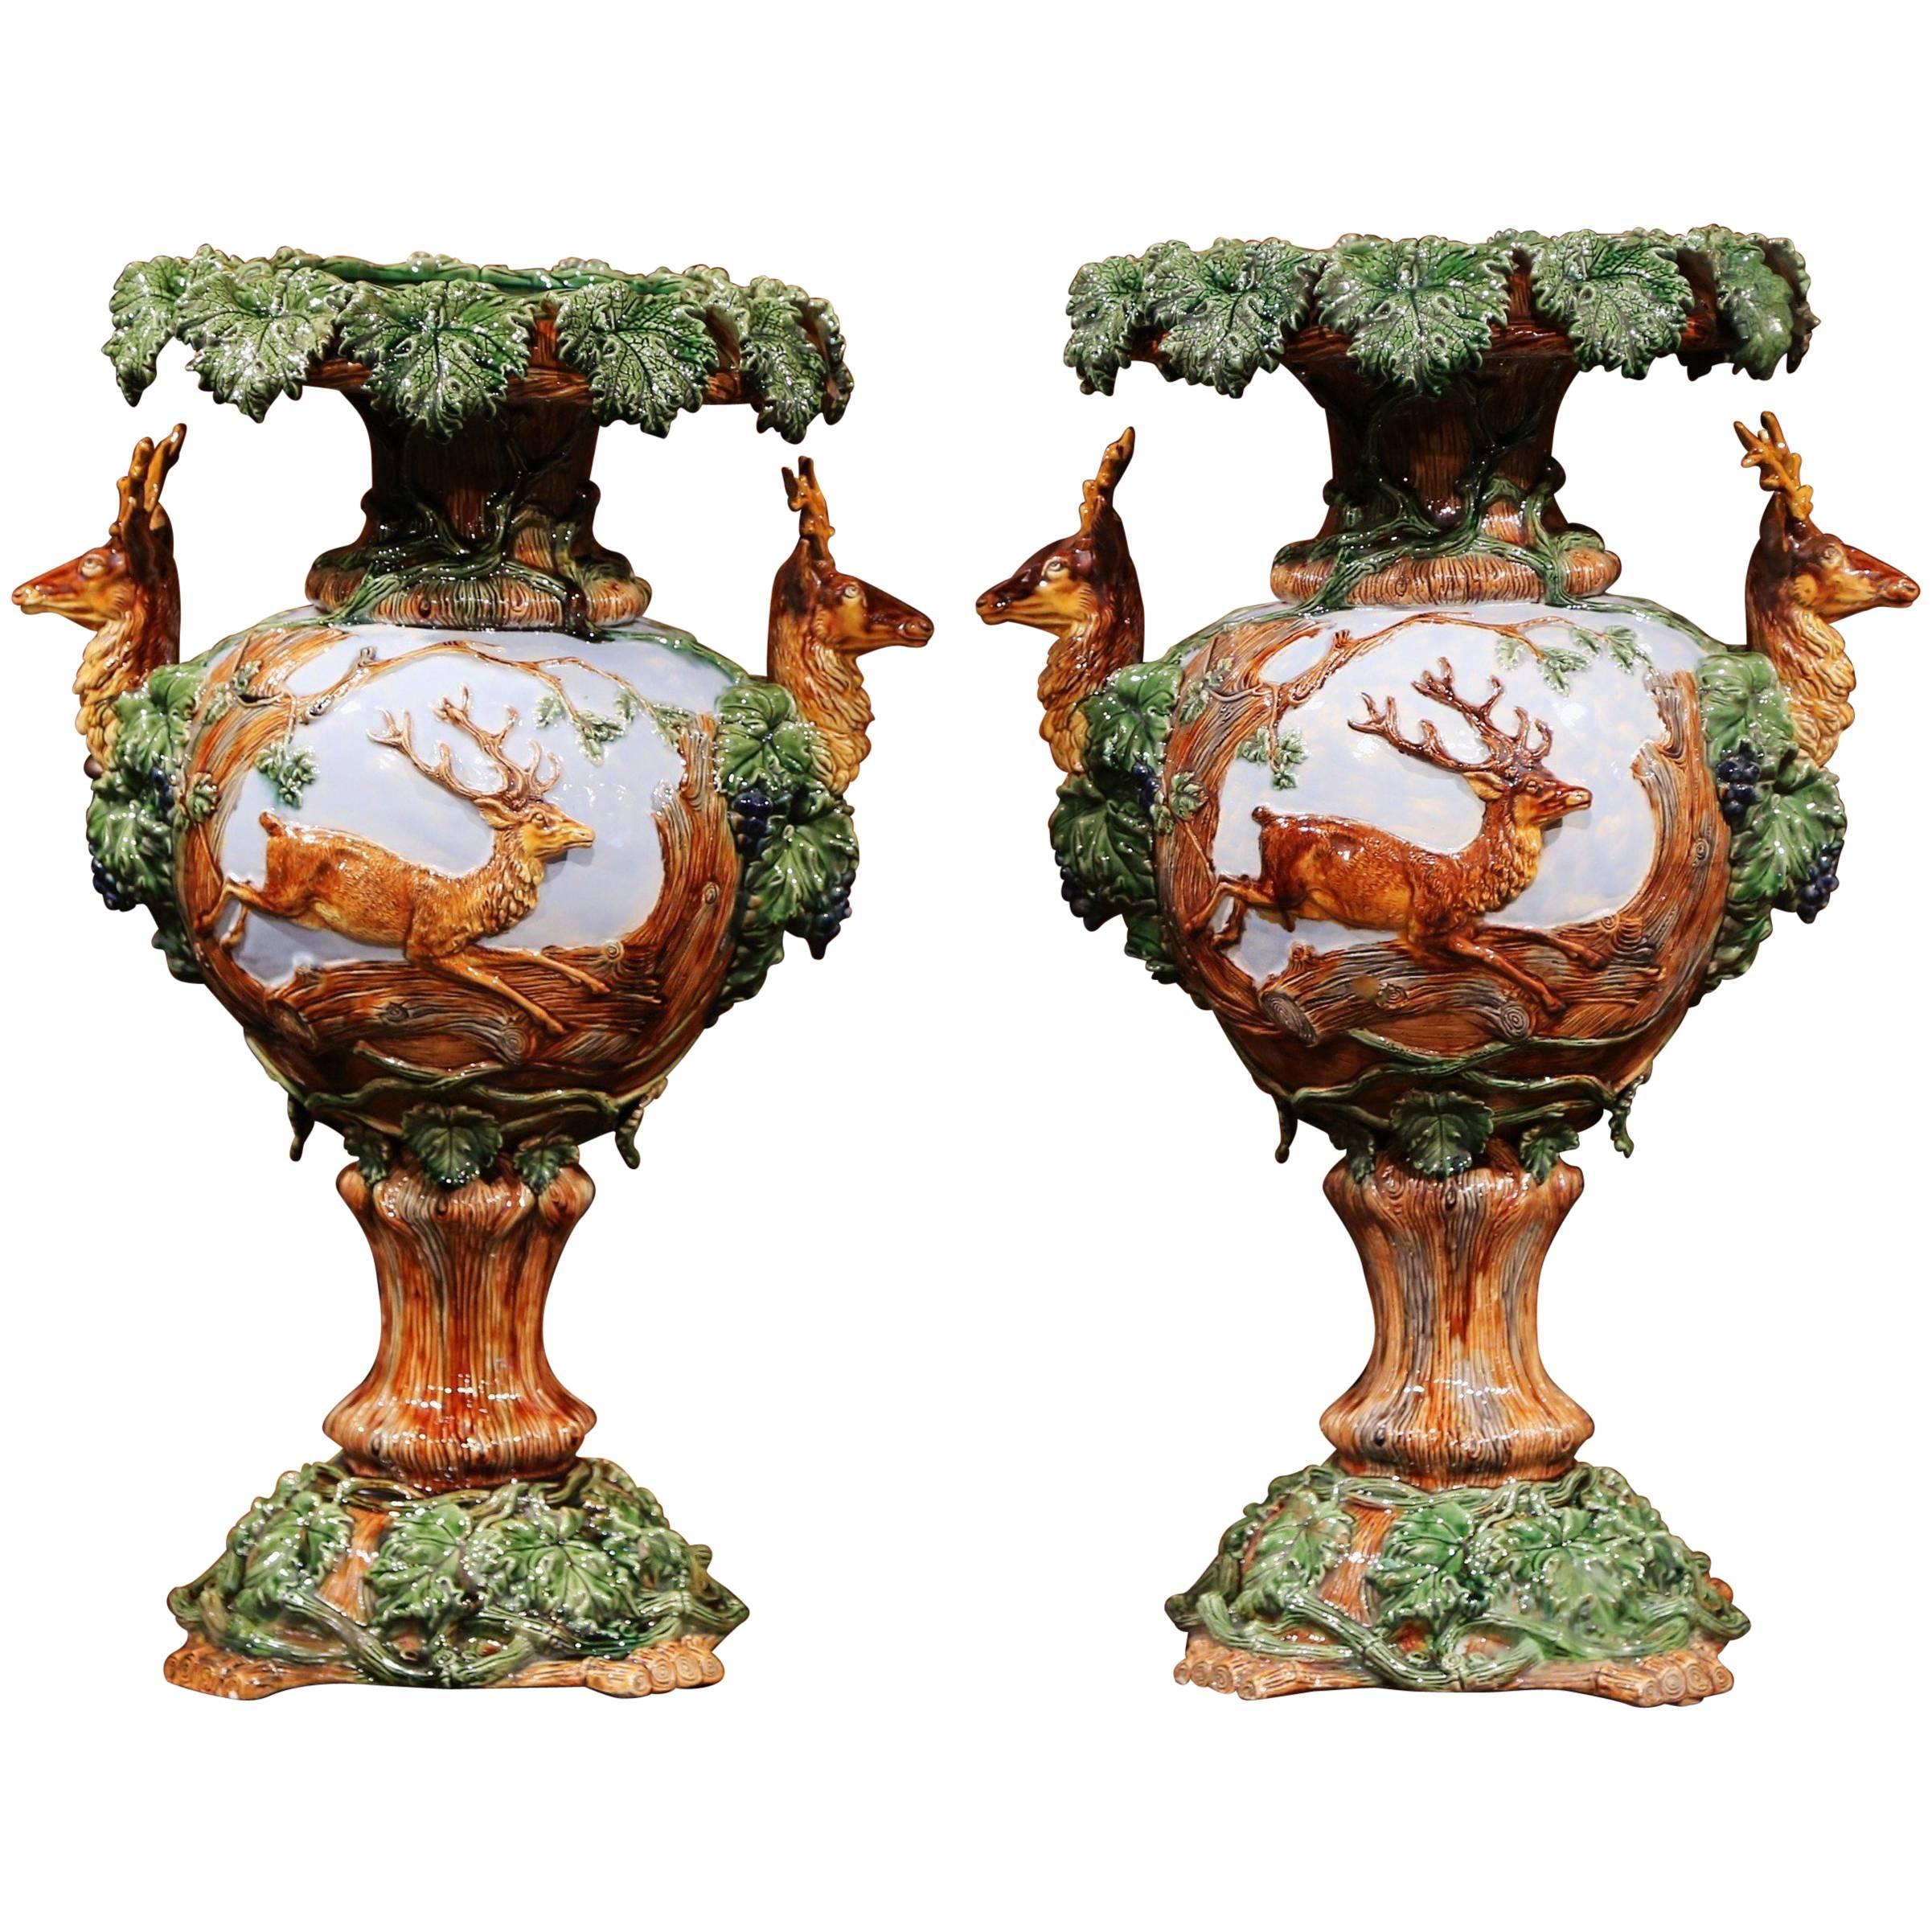 Pair of 19th Century French Painted Barbotine Vases with Deer, Grapes and Vines